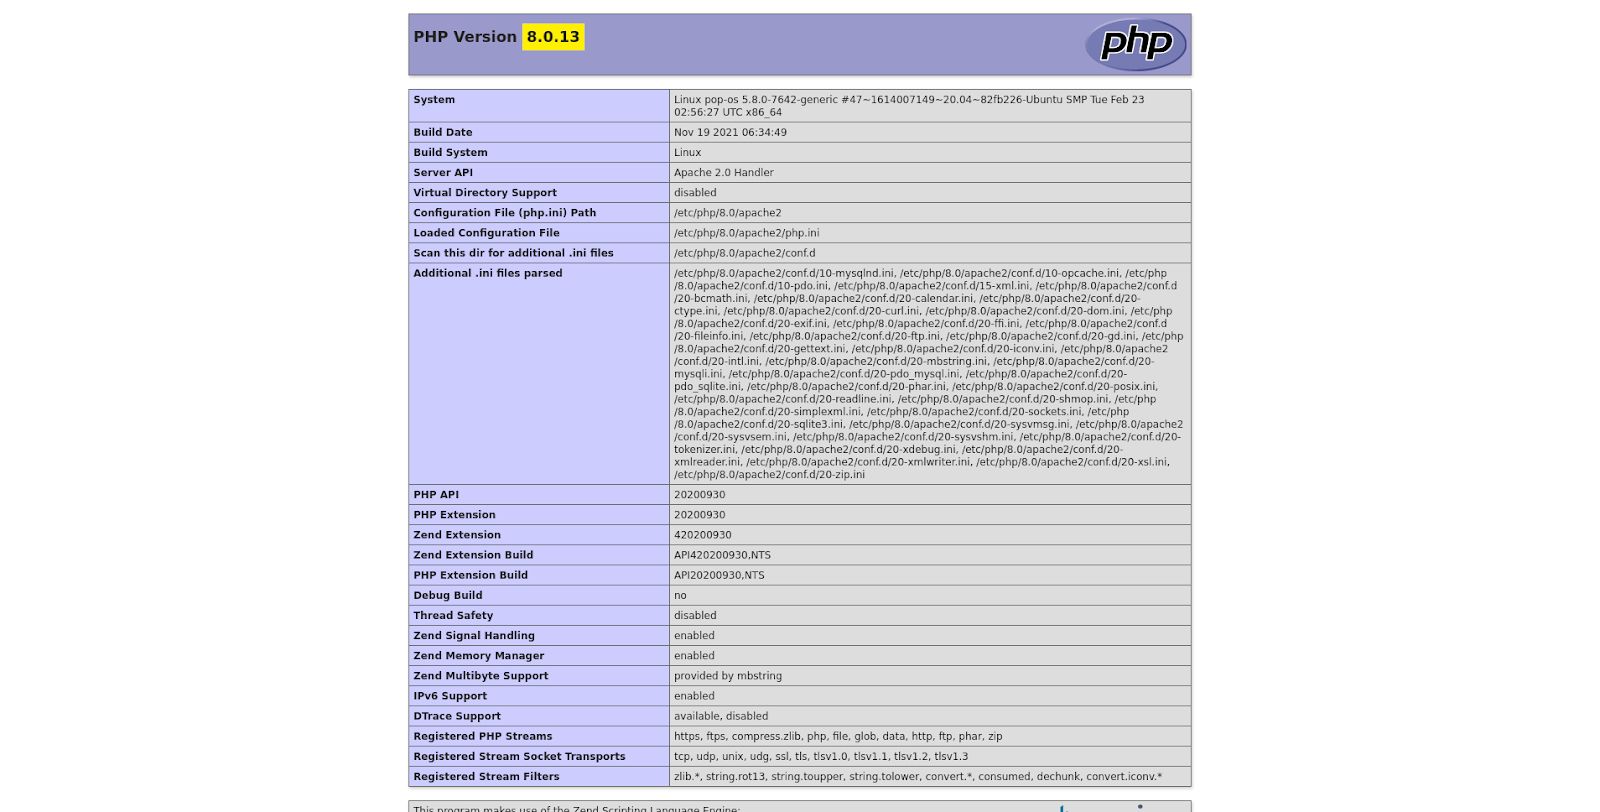 PHP version function